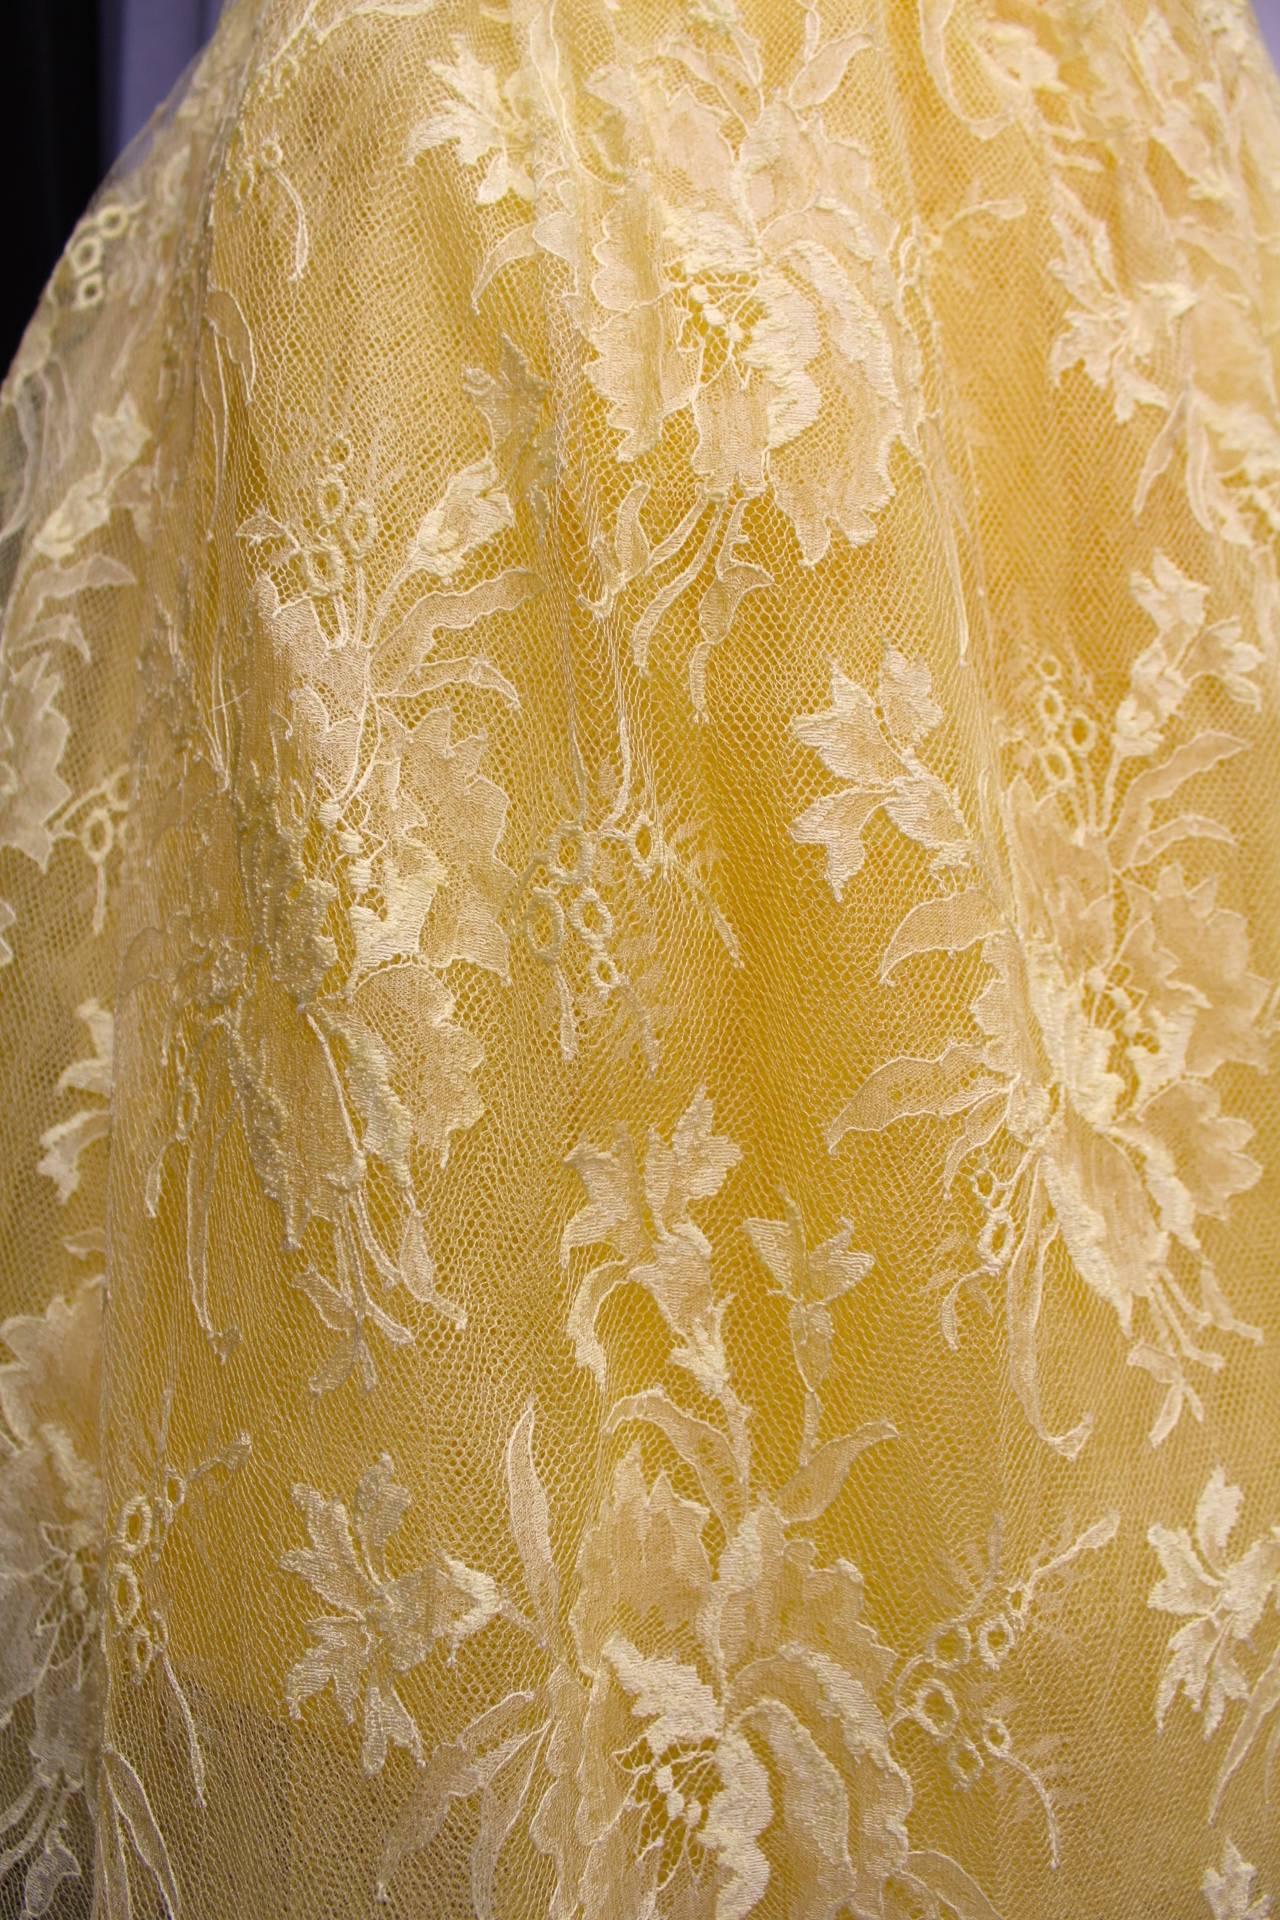 Women's 1950s Jeanne Lanvin by Castillo Yellow Lace and Tulle Ball Dress For Sale